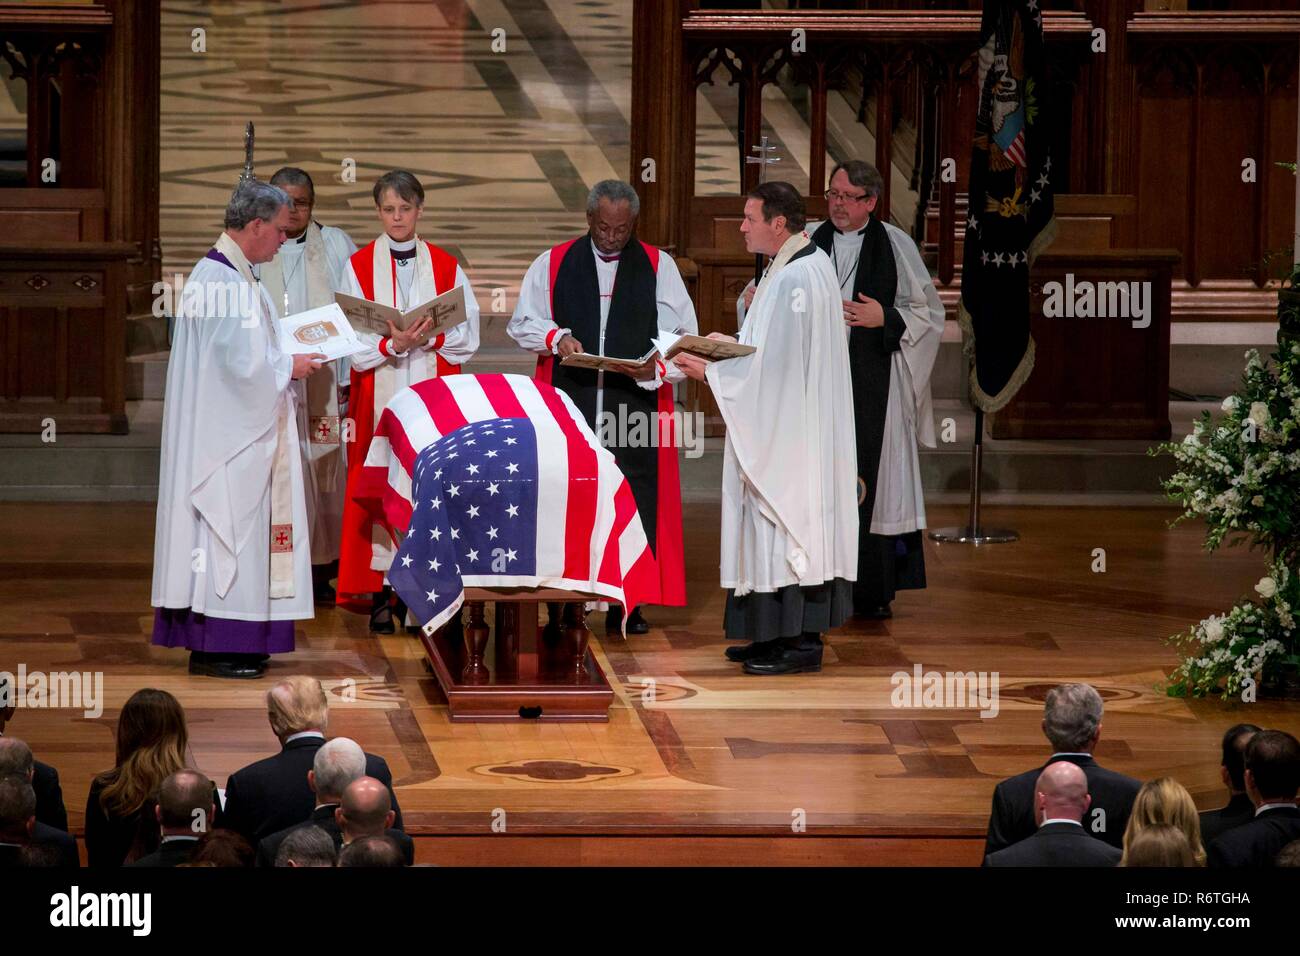 Washington DC, USA. 5th December, 2018. Presiding Bishop Michael Curry, center, and members of the Episcopal clergy perform the funeral rites over the flag draped casket of former U.S President George H.W. Bush during the State Funeral at the National Cathedral December 5, 2018 in Washington, DC. Bush, the 41st President, died in his Houston home at age 94. Credit: Planetpix/Alamy Live News Stock Photo